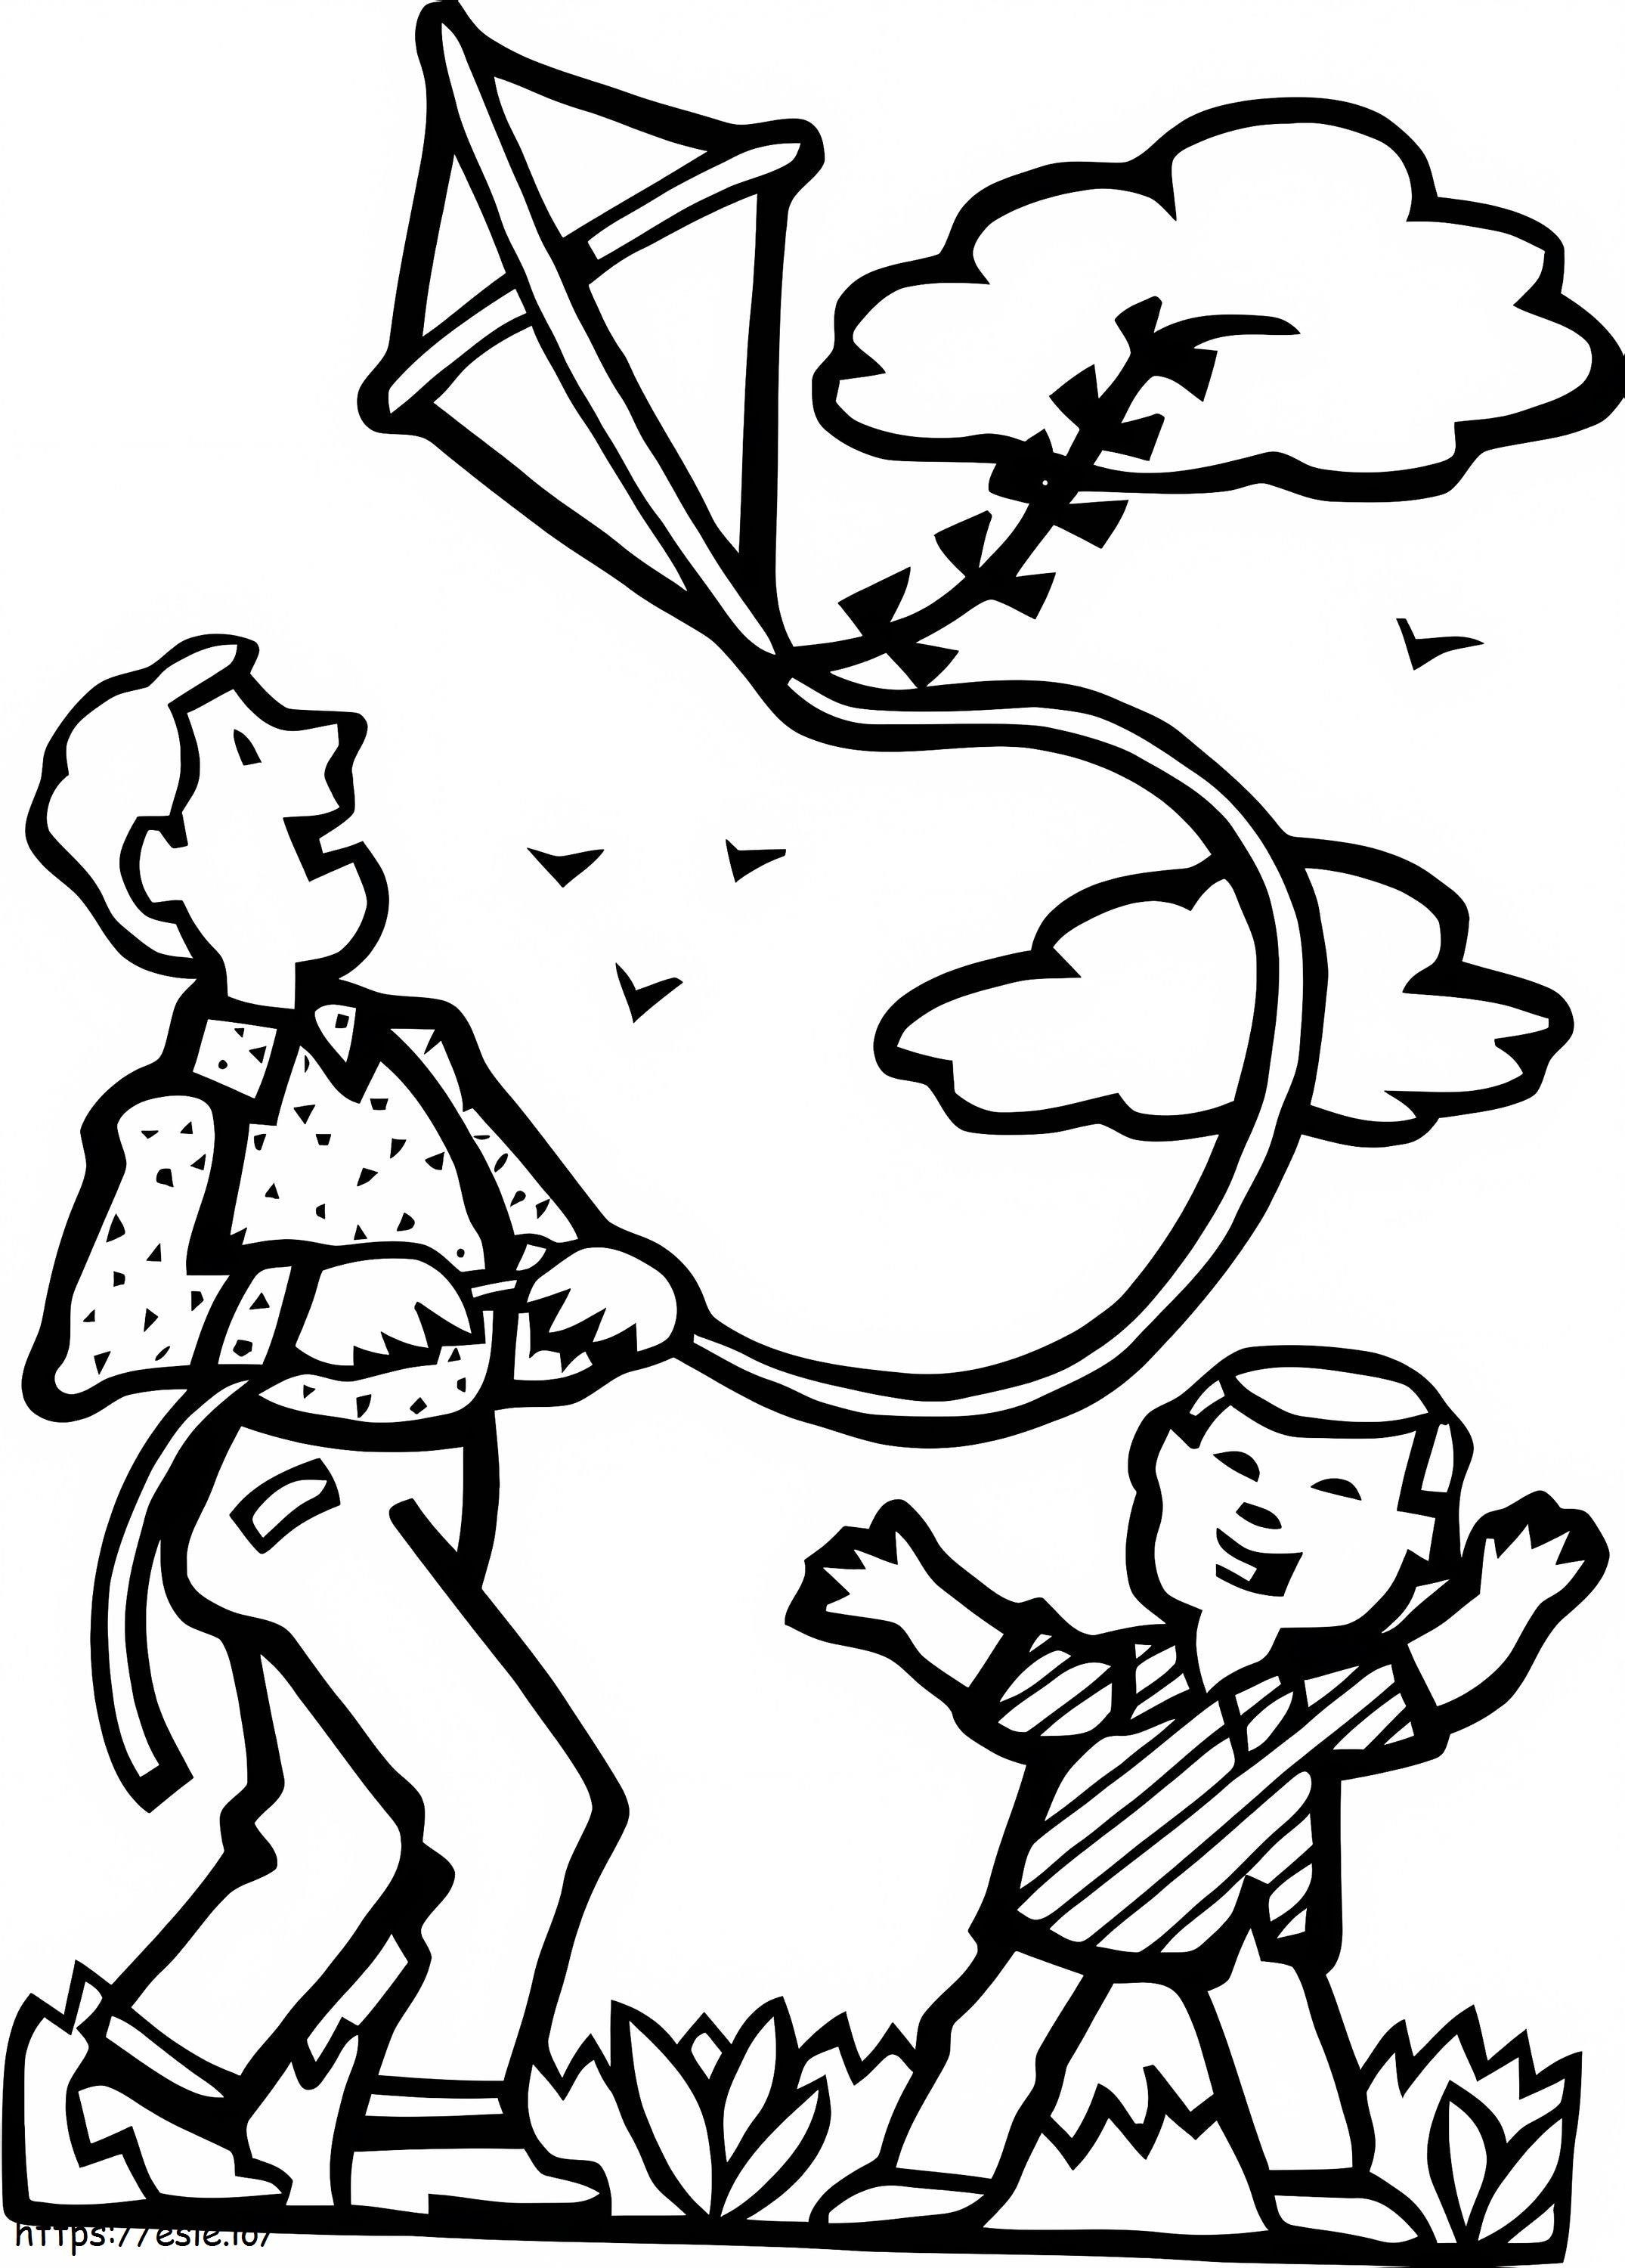 Dad And Son Fly A Kite coloring page